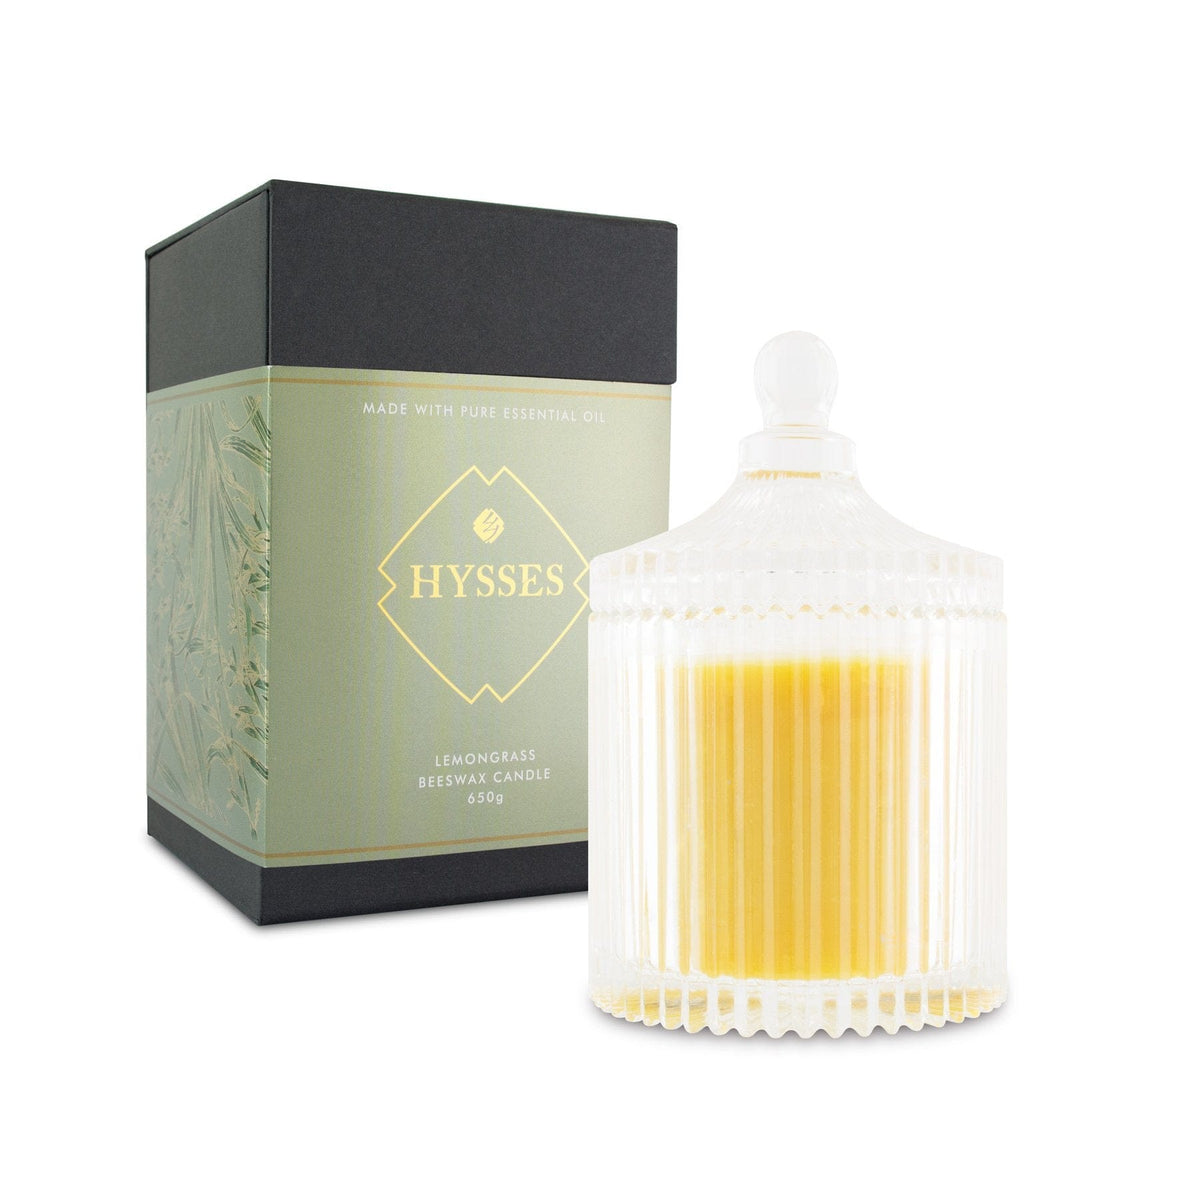 Hysses Home Scents 650g Beeswax Candle Lemongrass